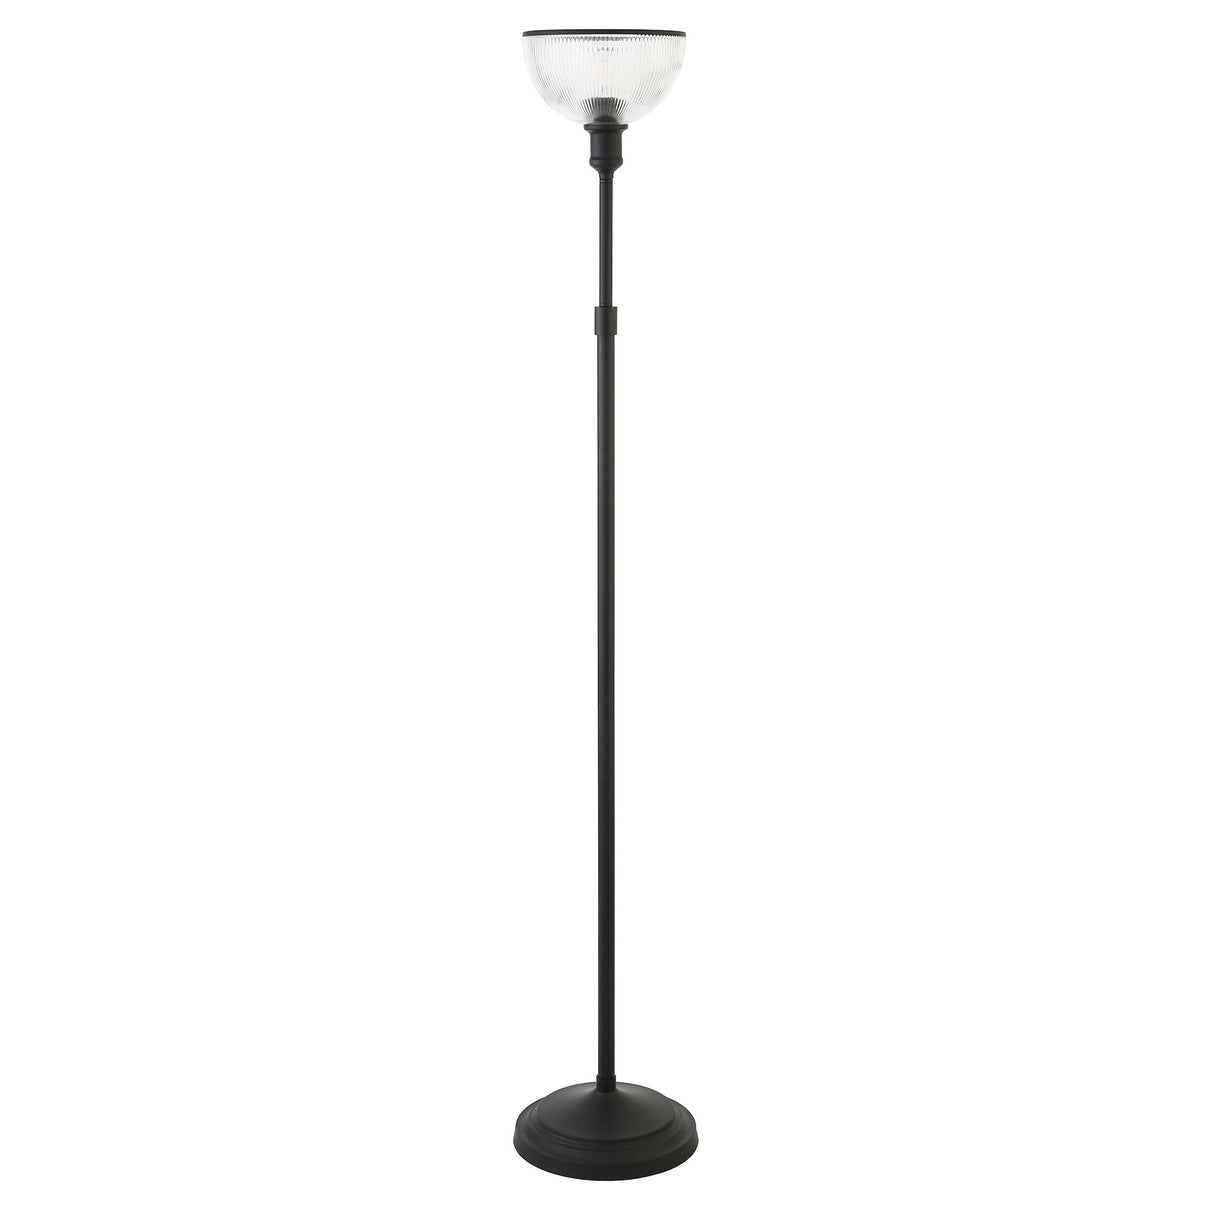 65" Black Novelty Floor Lamp With Clear Transparent Glass Dome Shade